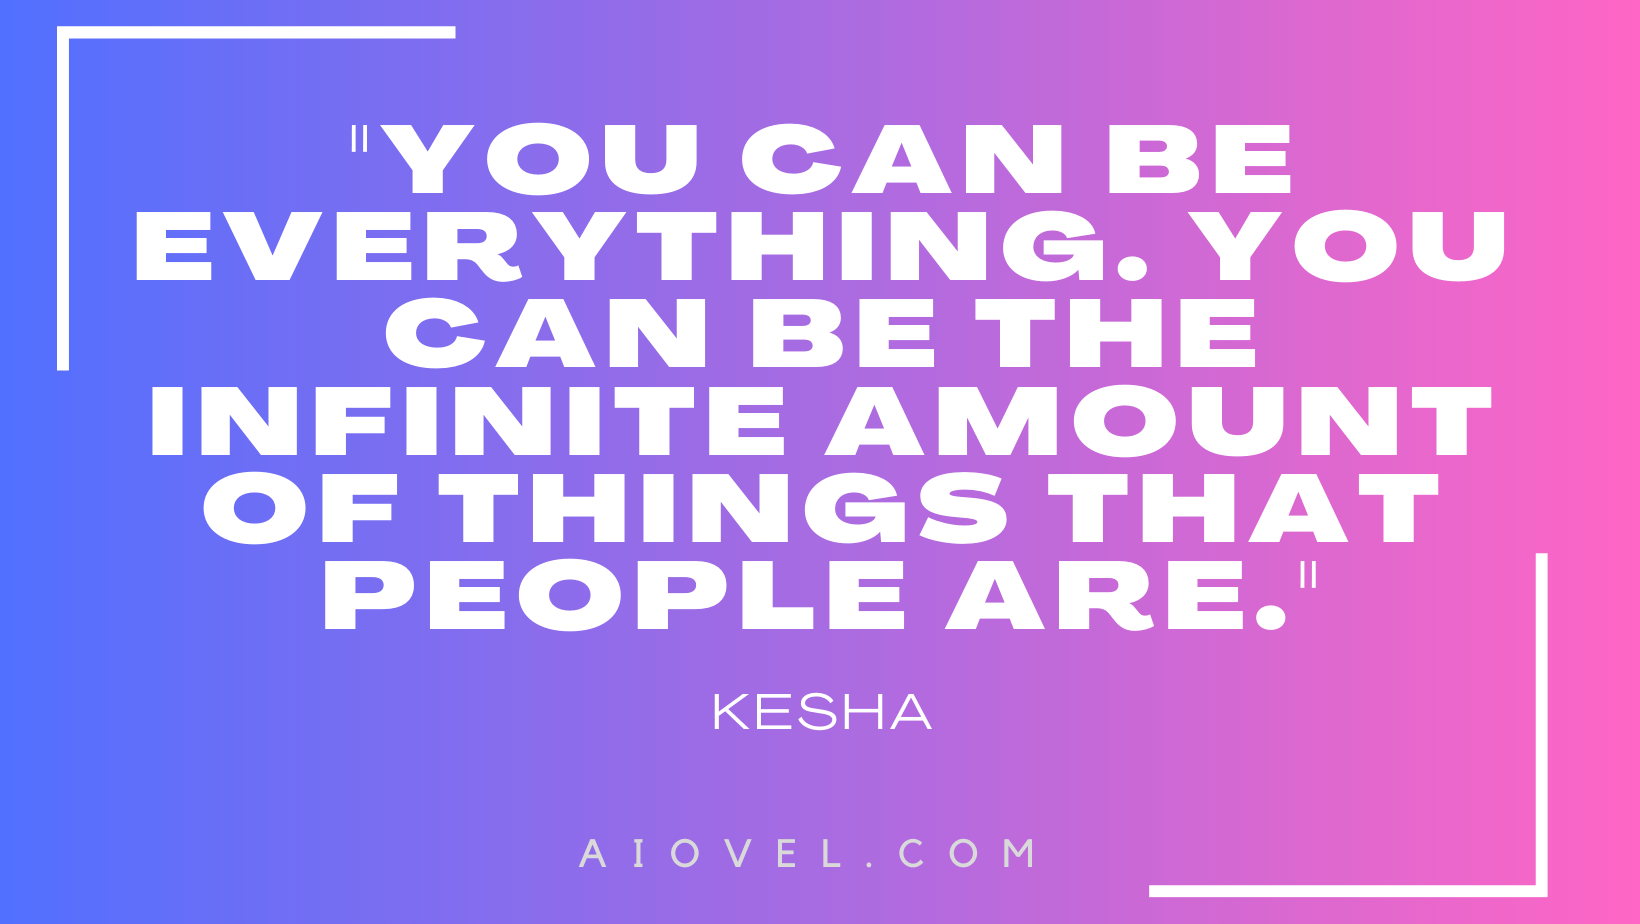 "You can be everything. You can be the infinite amount of things that people are." - Kesha 🎤